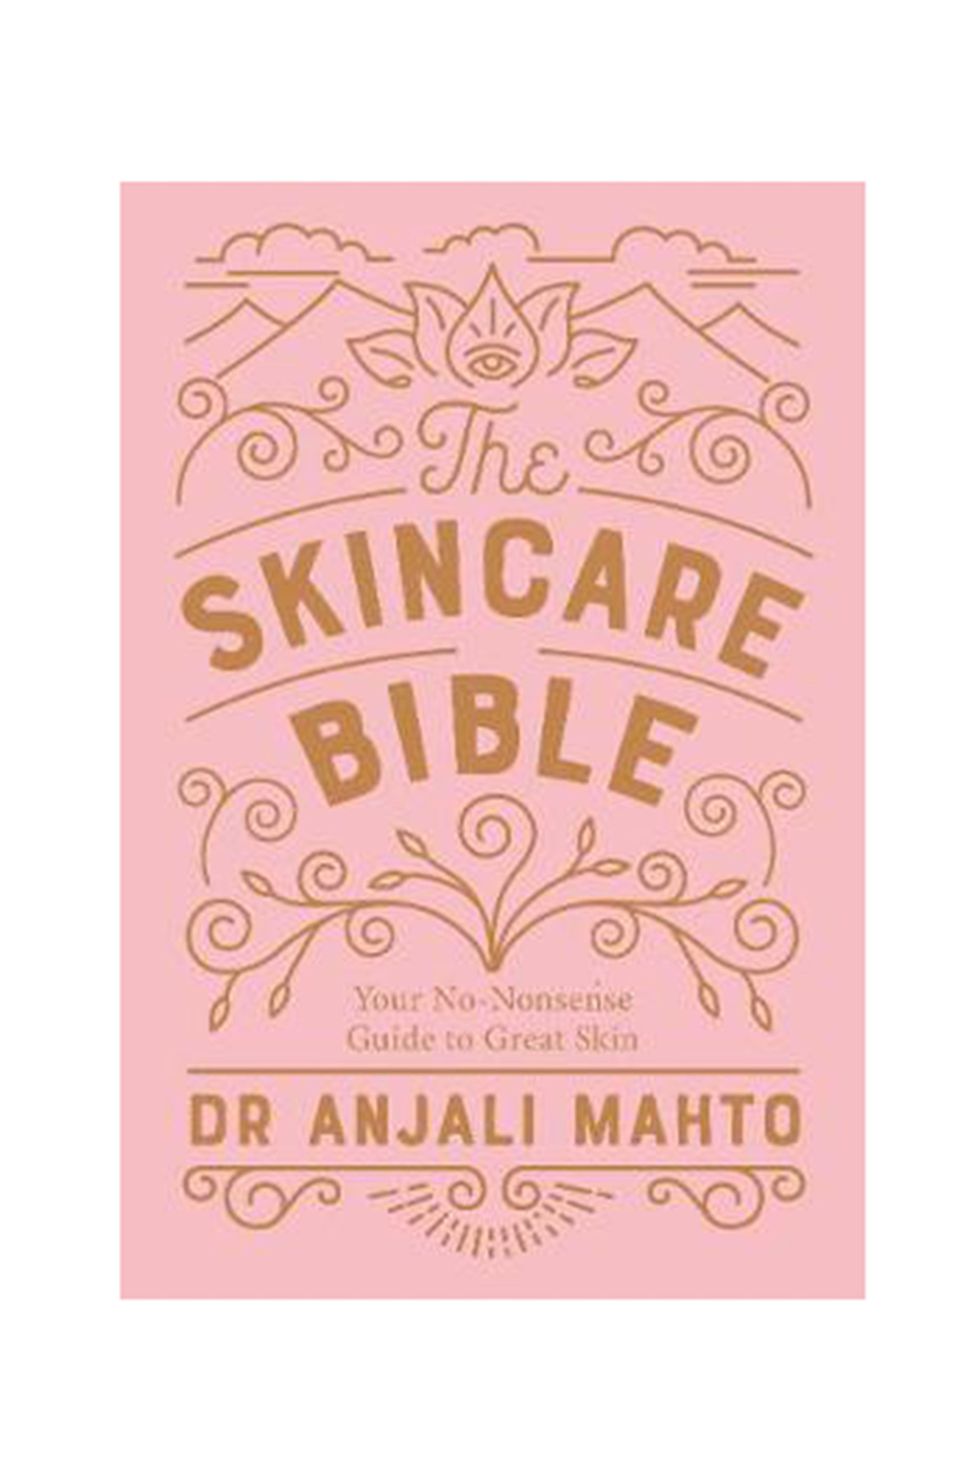 The Skincare Bible by Dr Anjali Mahto